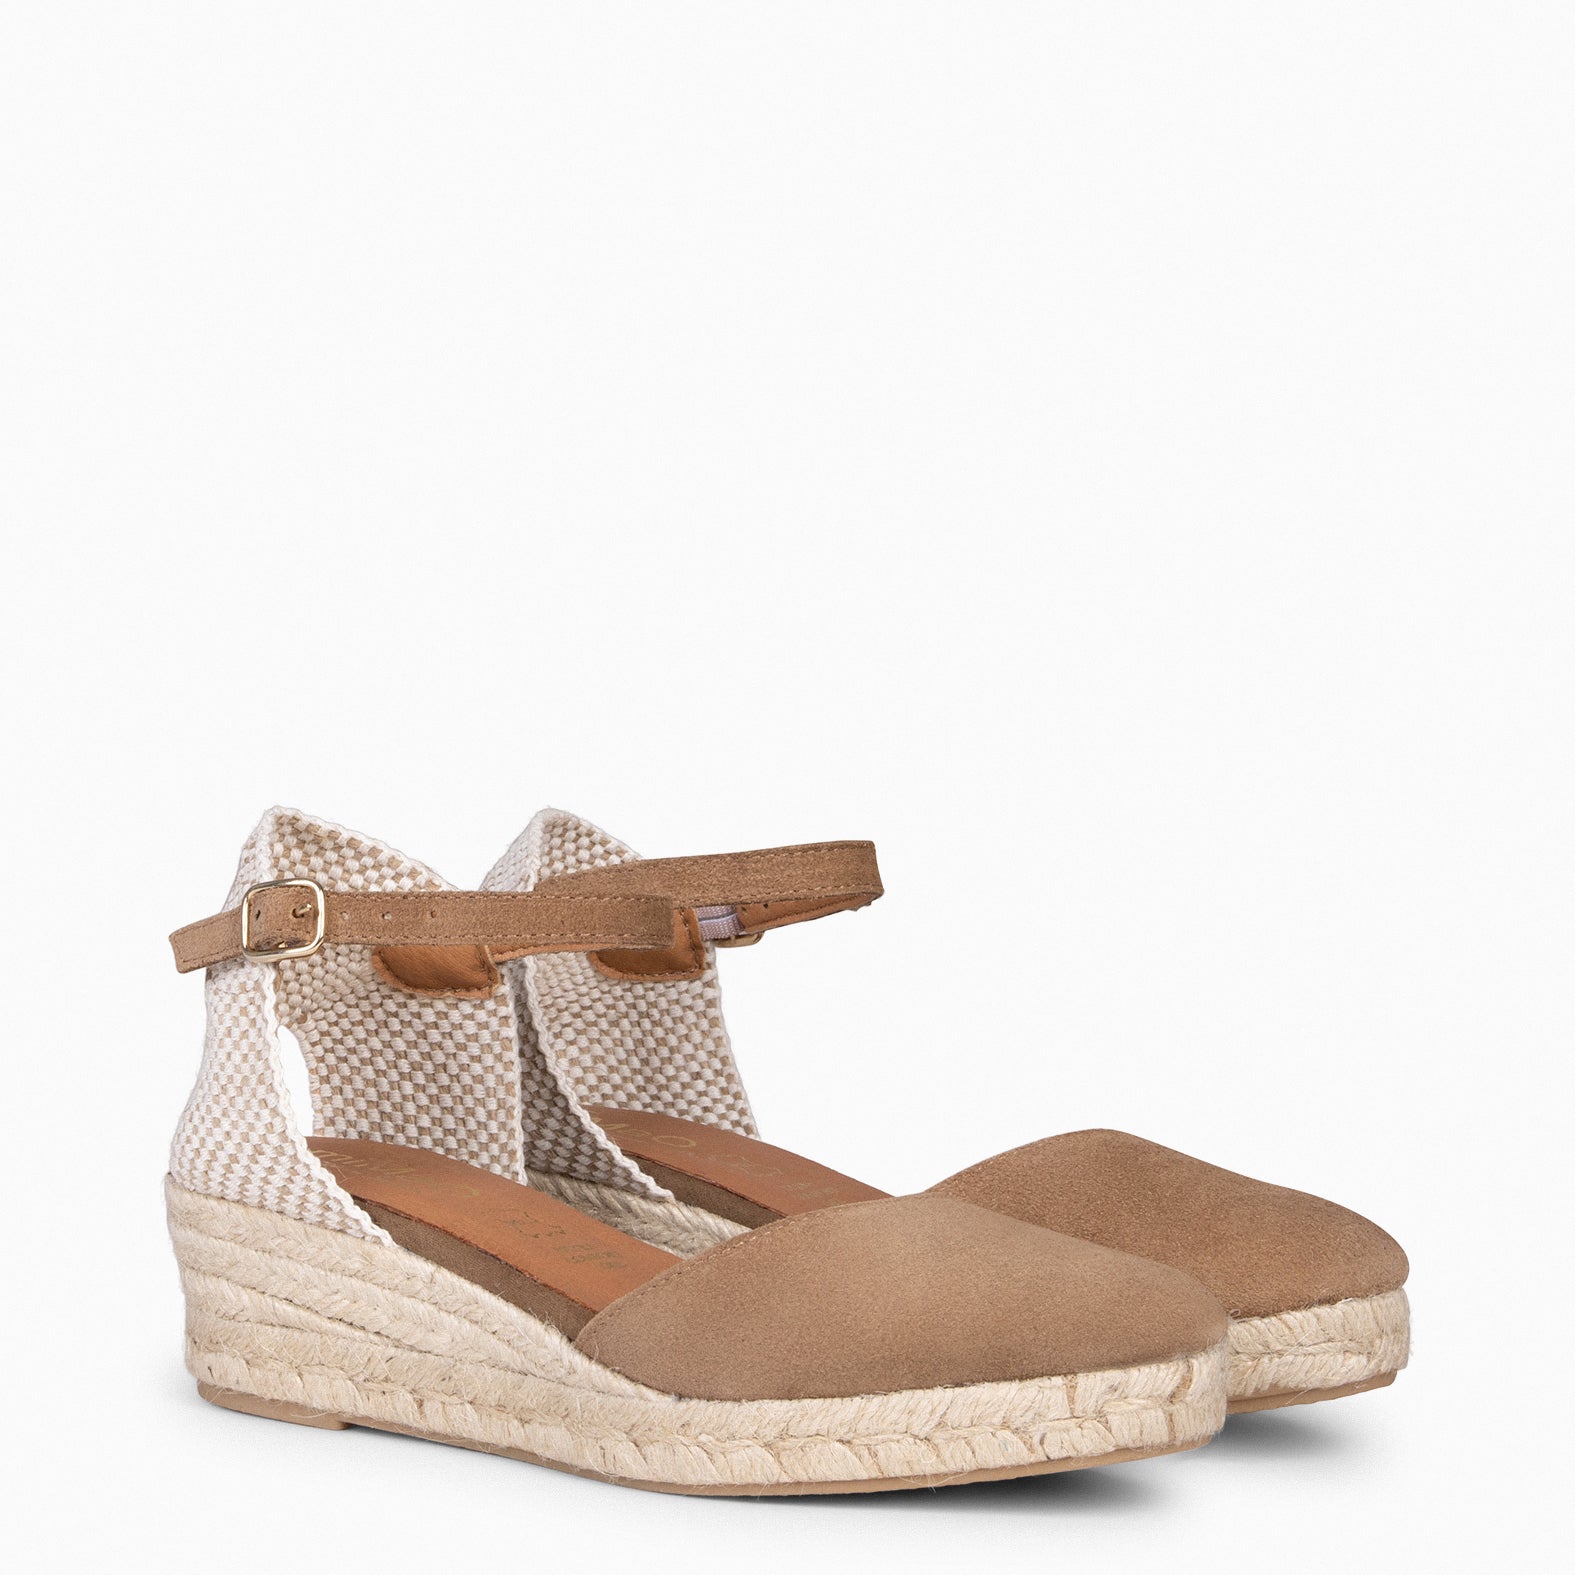 FORNELLS – TAUPE WEDGE ESPADRILLES